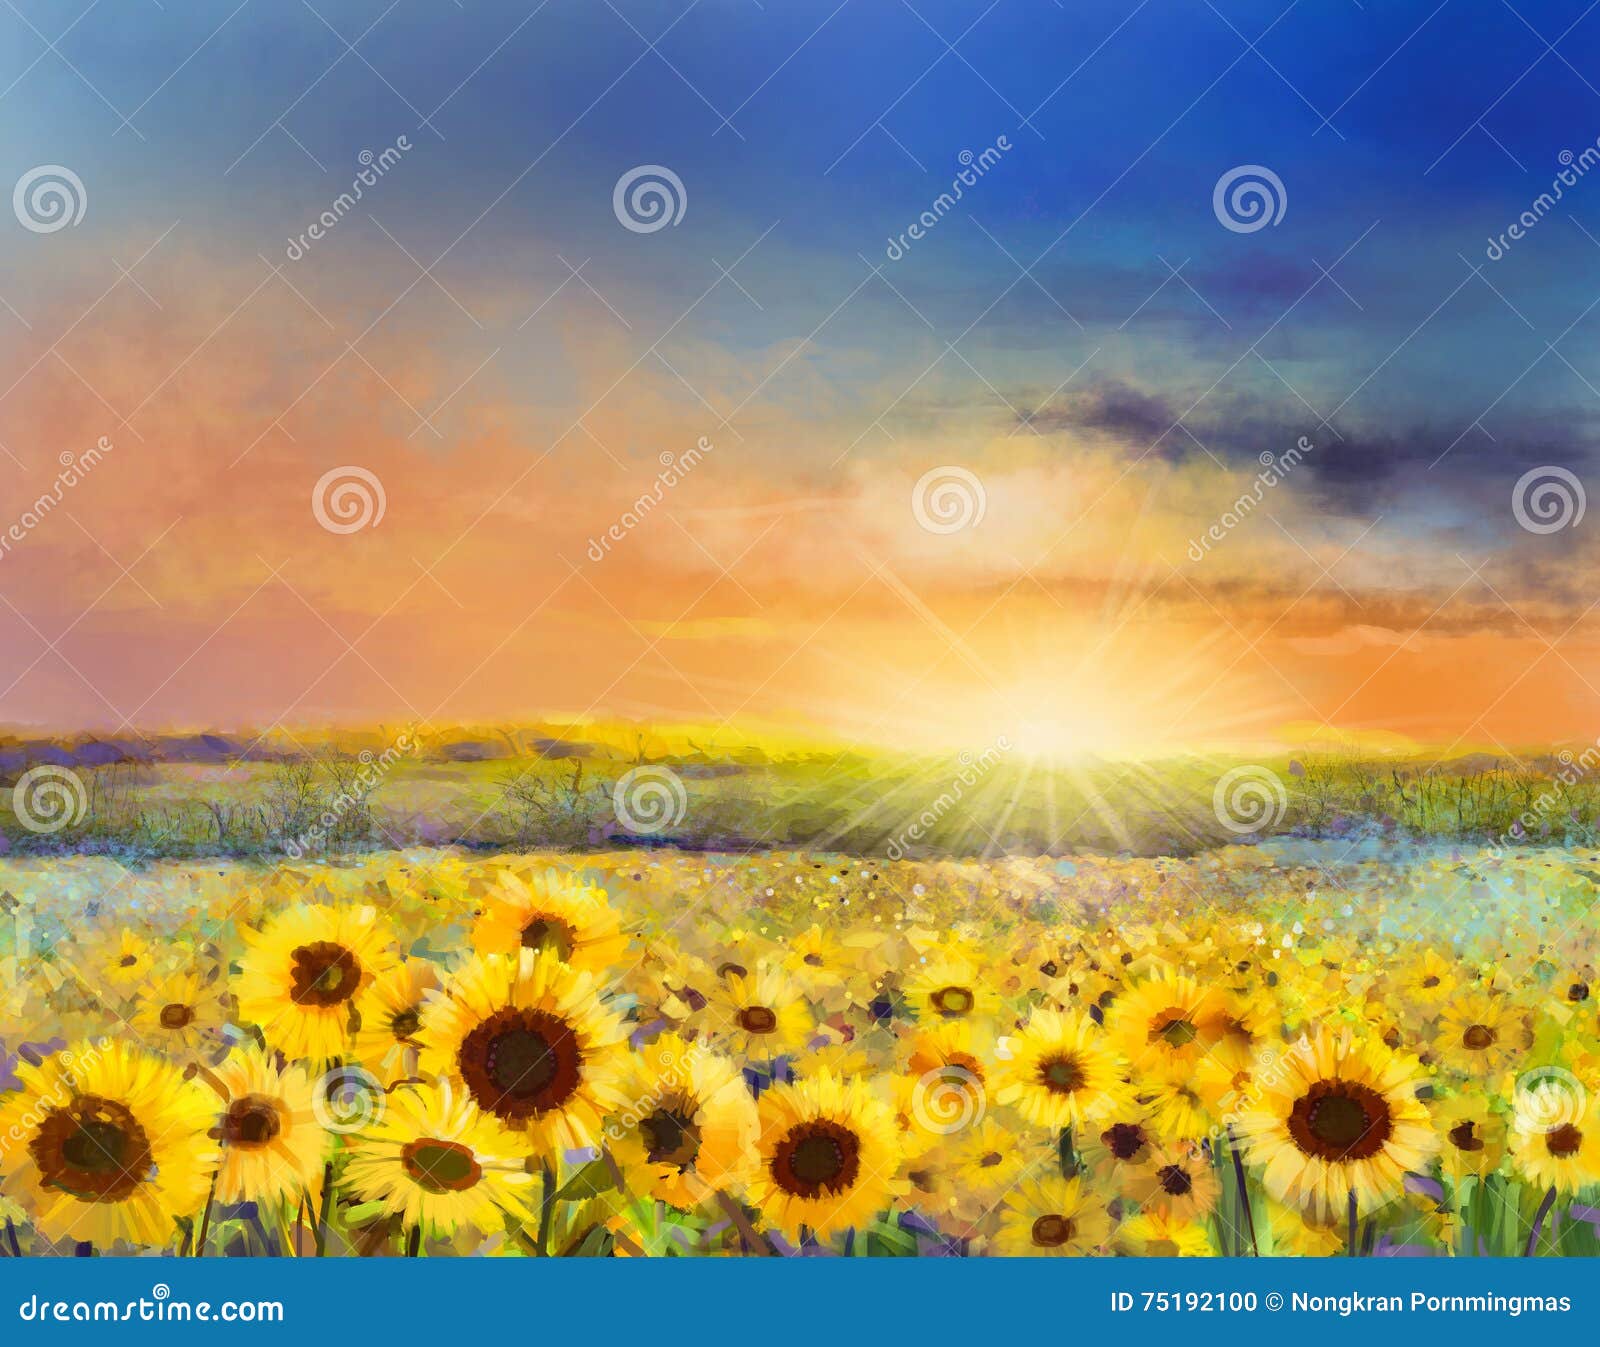 oil painting of a rural sunset landscape with a golden sunflower